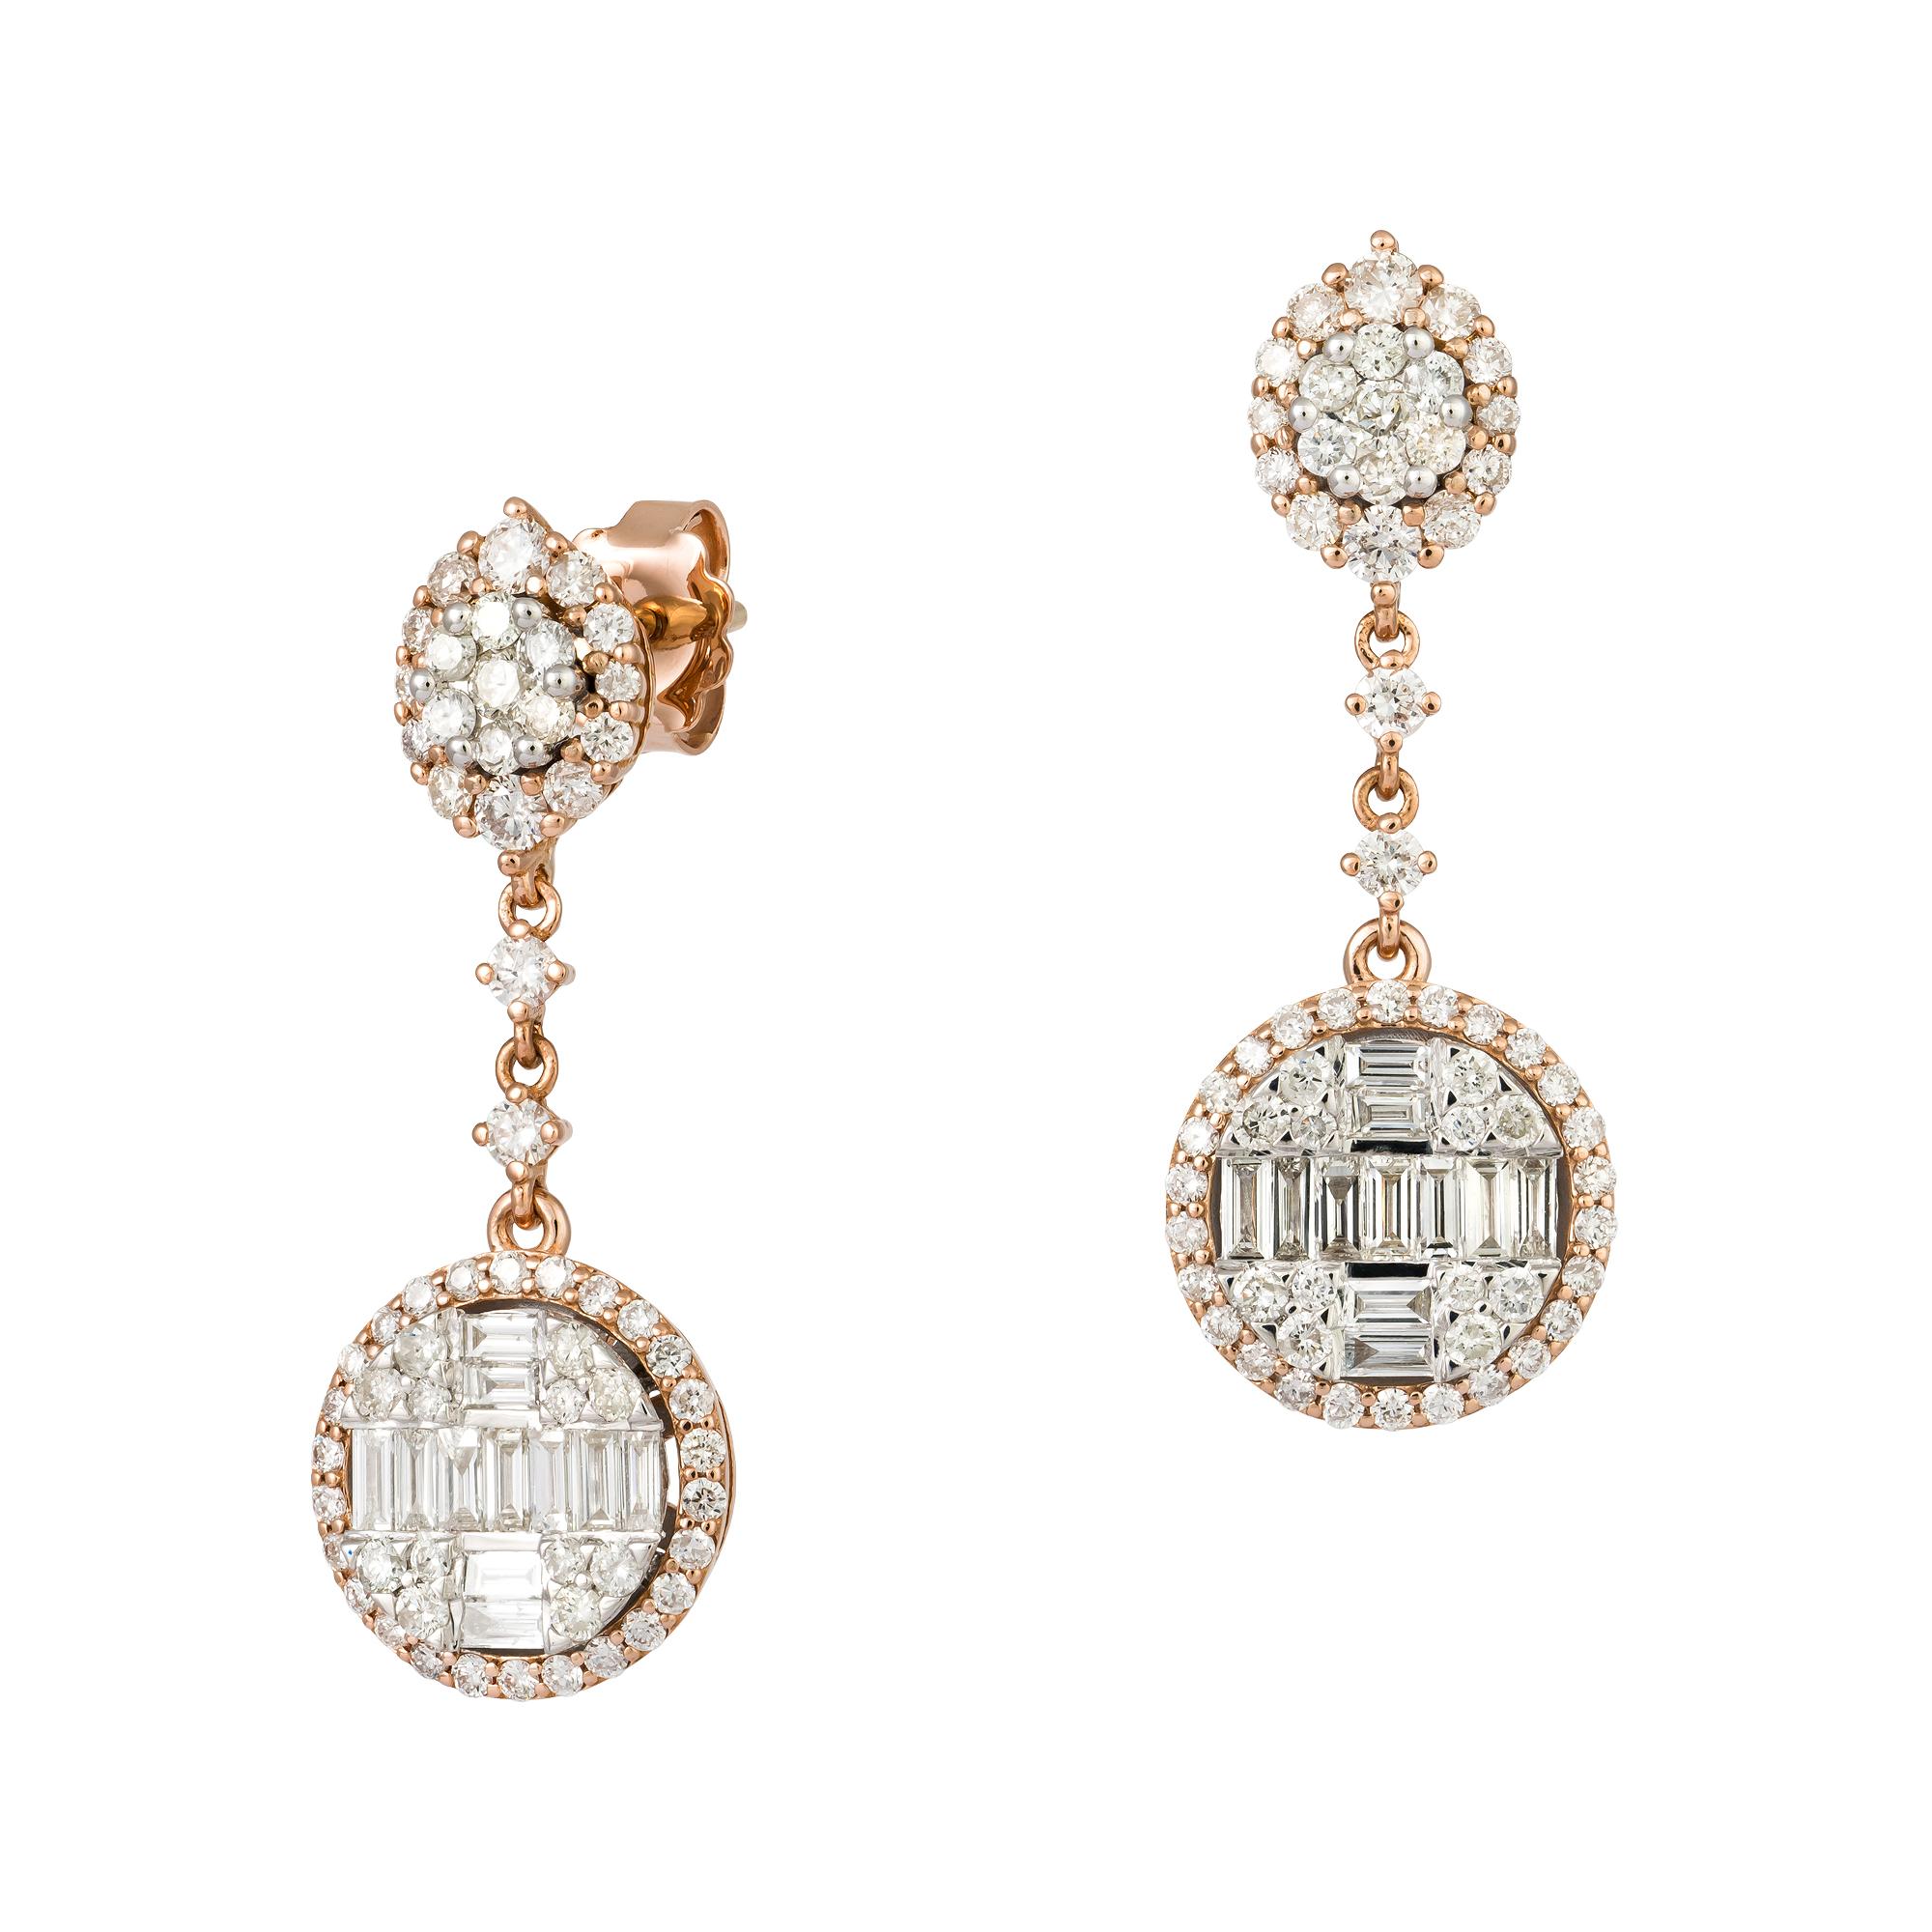 EARRING 18K White/Pink Gold Diamond 1.63 Cts/118 Pcs Tapered Baguette 0.71 Cts/22 Pcs